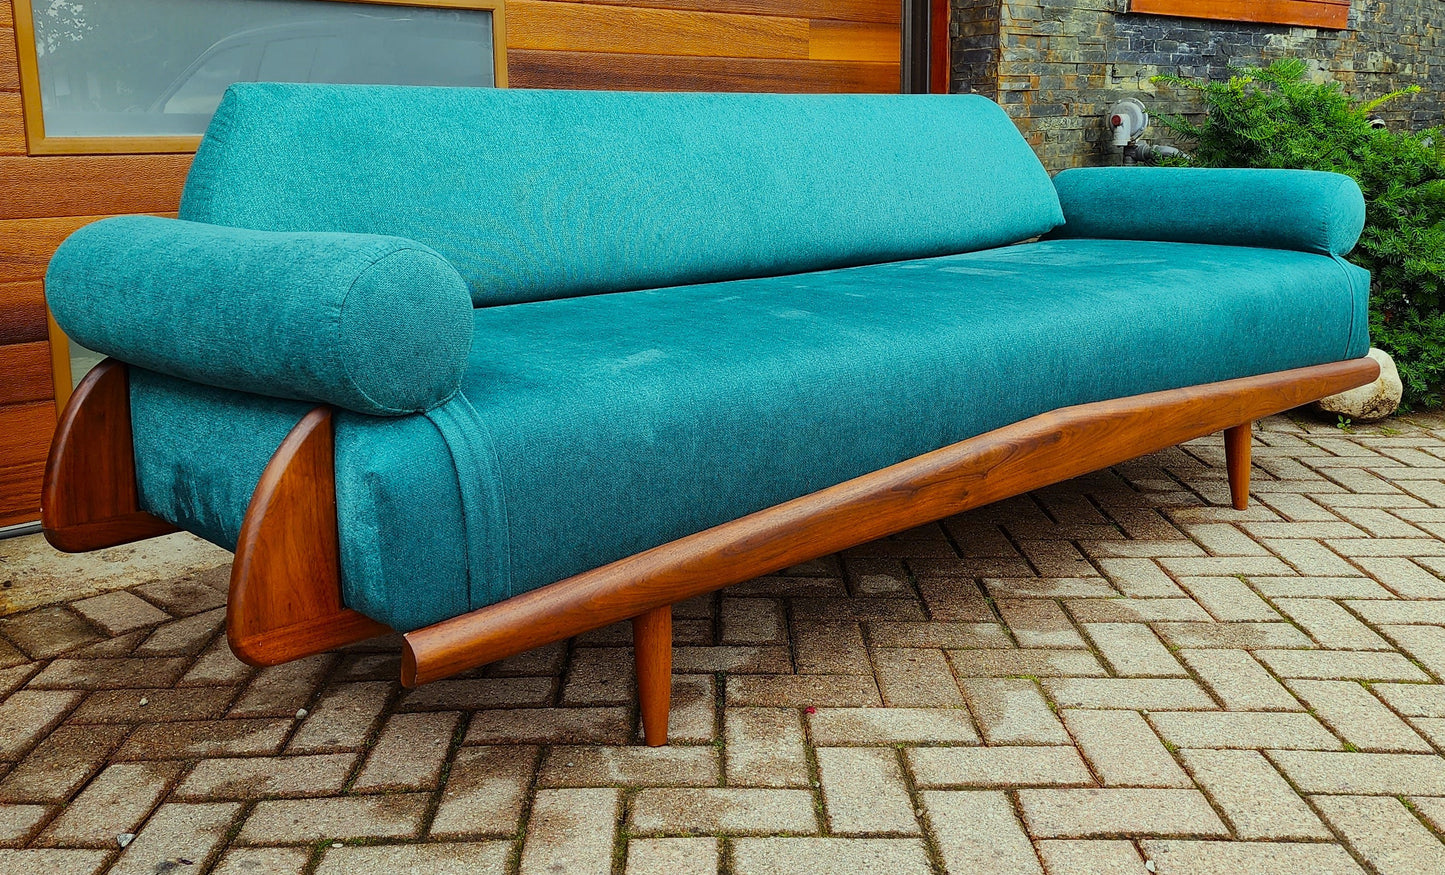 REFINISHED REUPHOLSTERED Mid Century Modern Sofa by Adrian Pearsall 100"